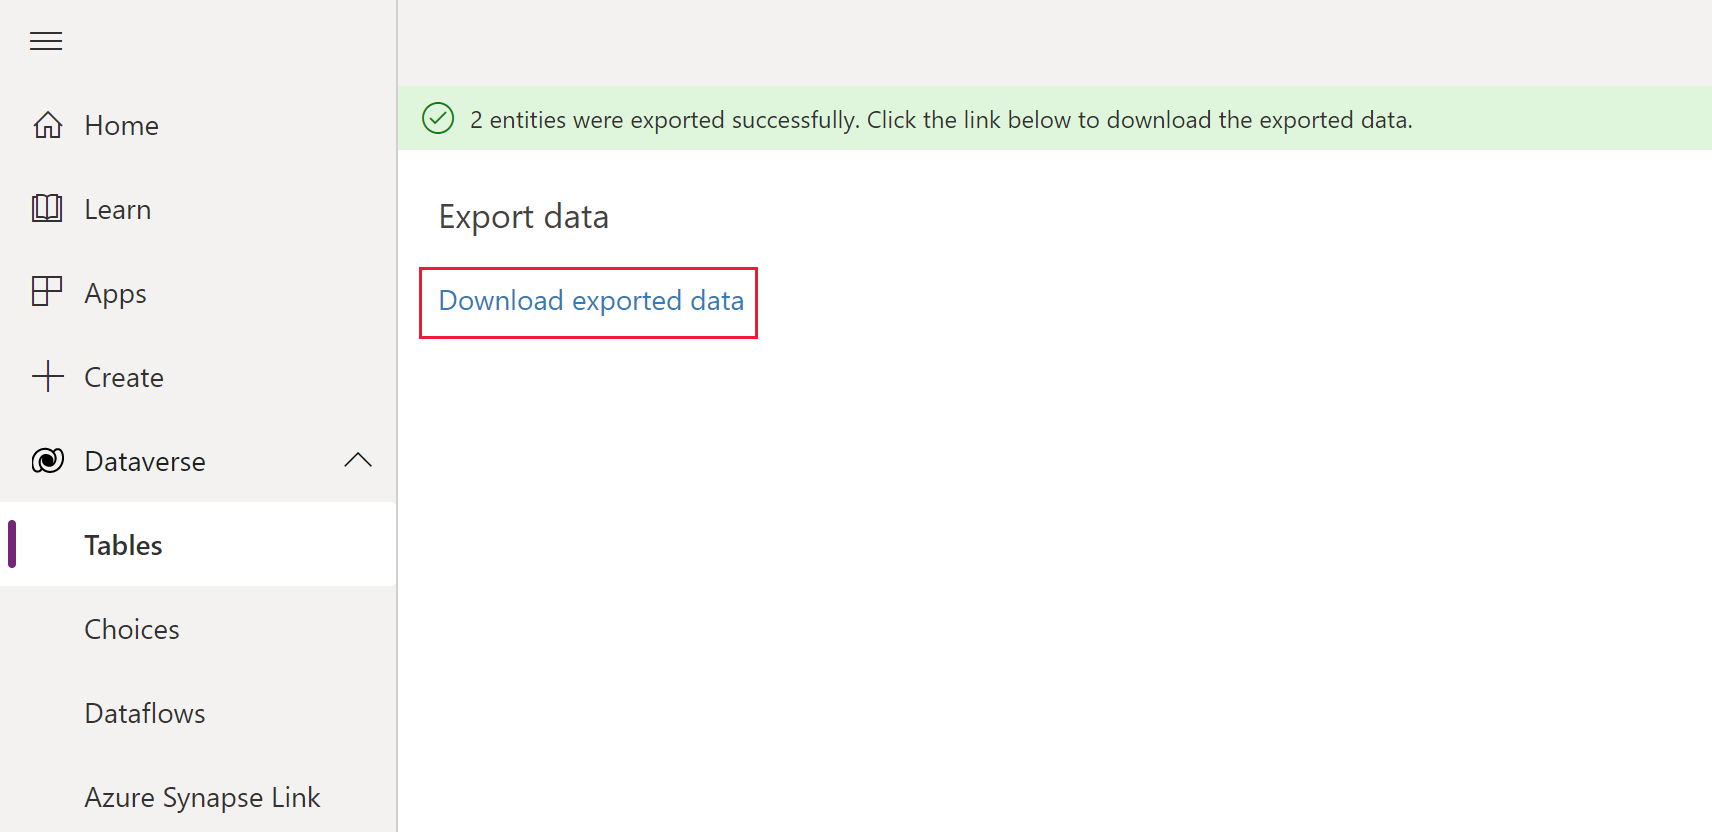 Sample export that shows successful export with link downloadable file.